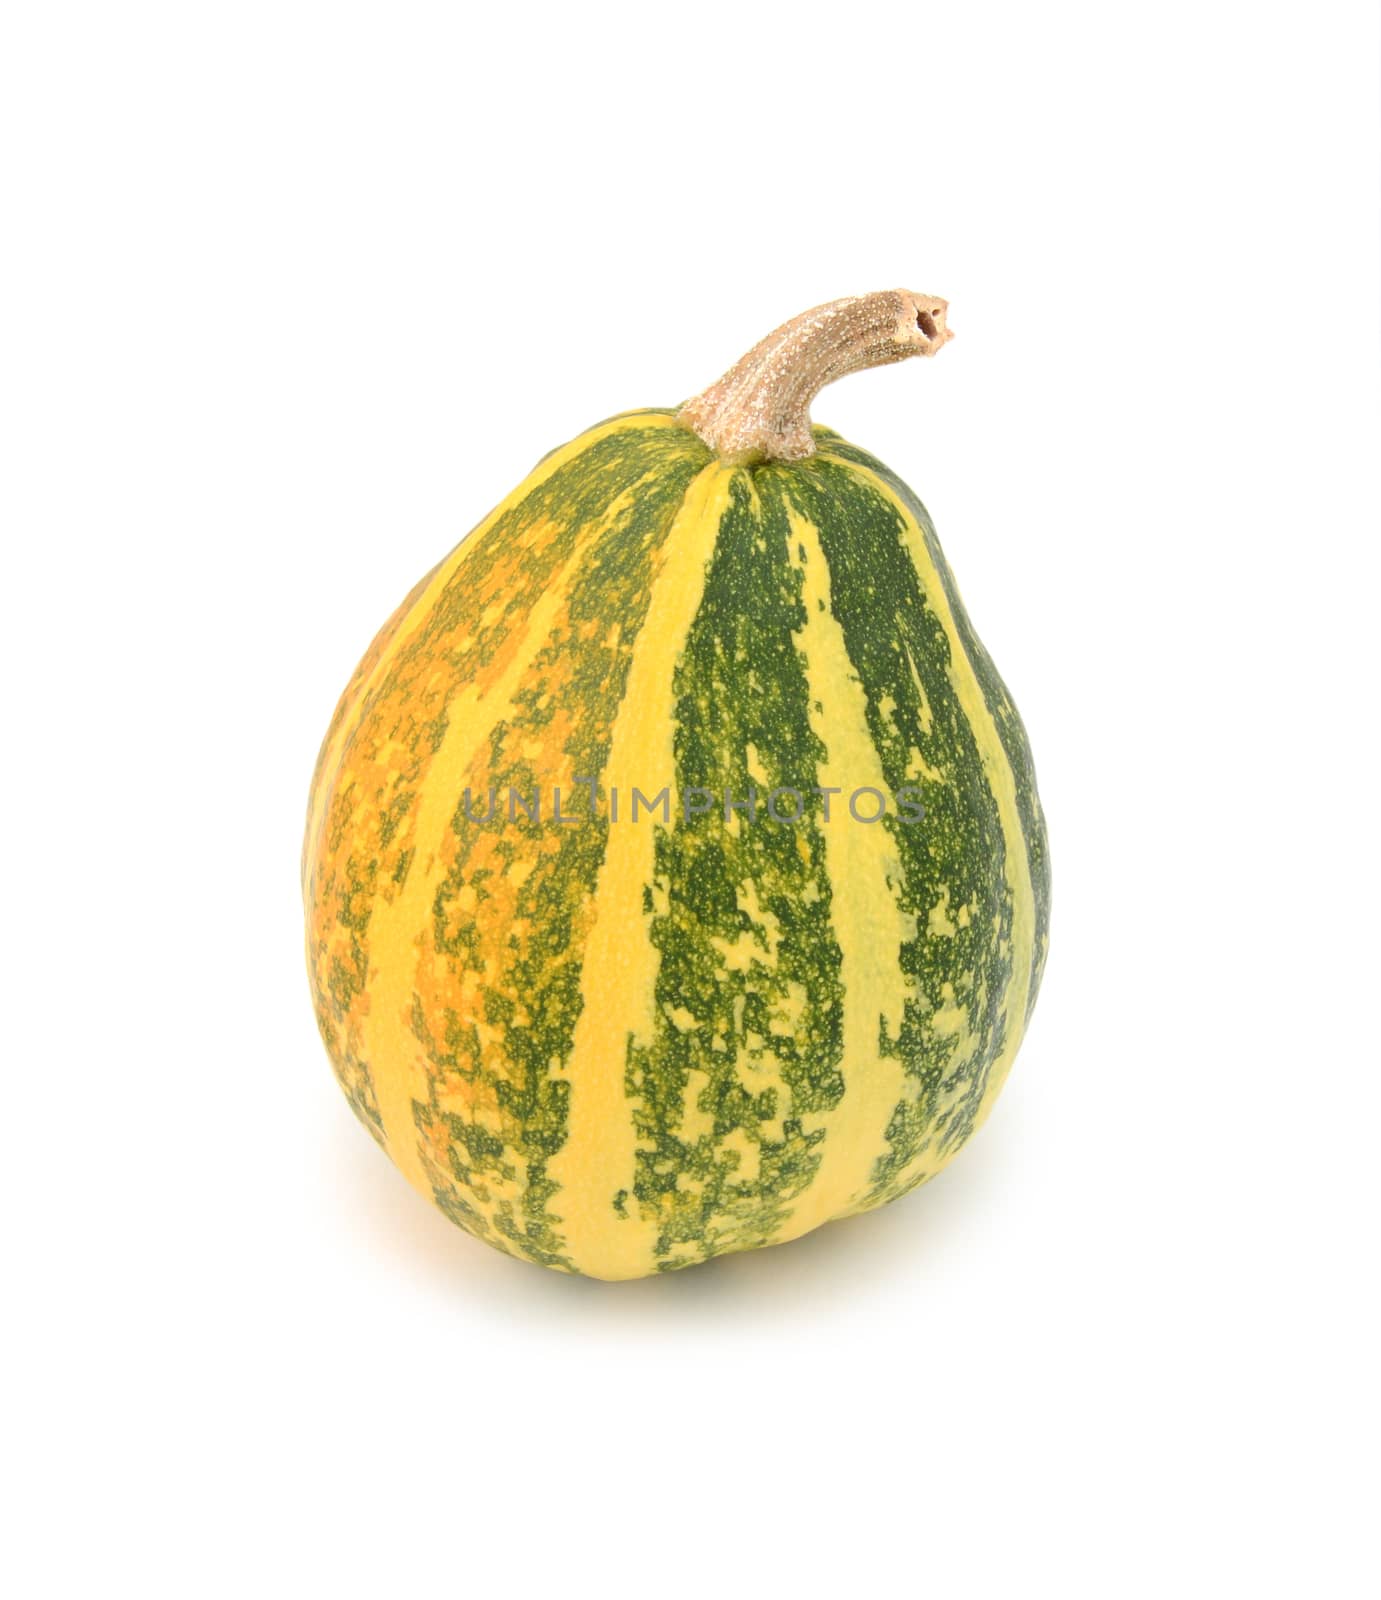 Half-ripe ornamental gourd with yellow and green stripes by sarahdoow